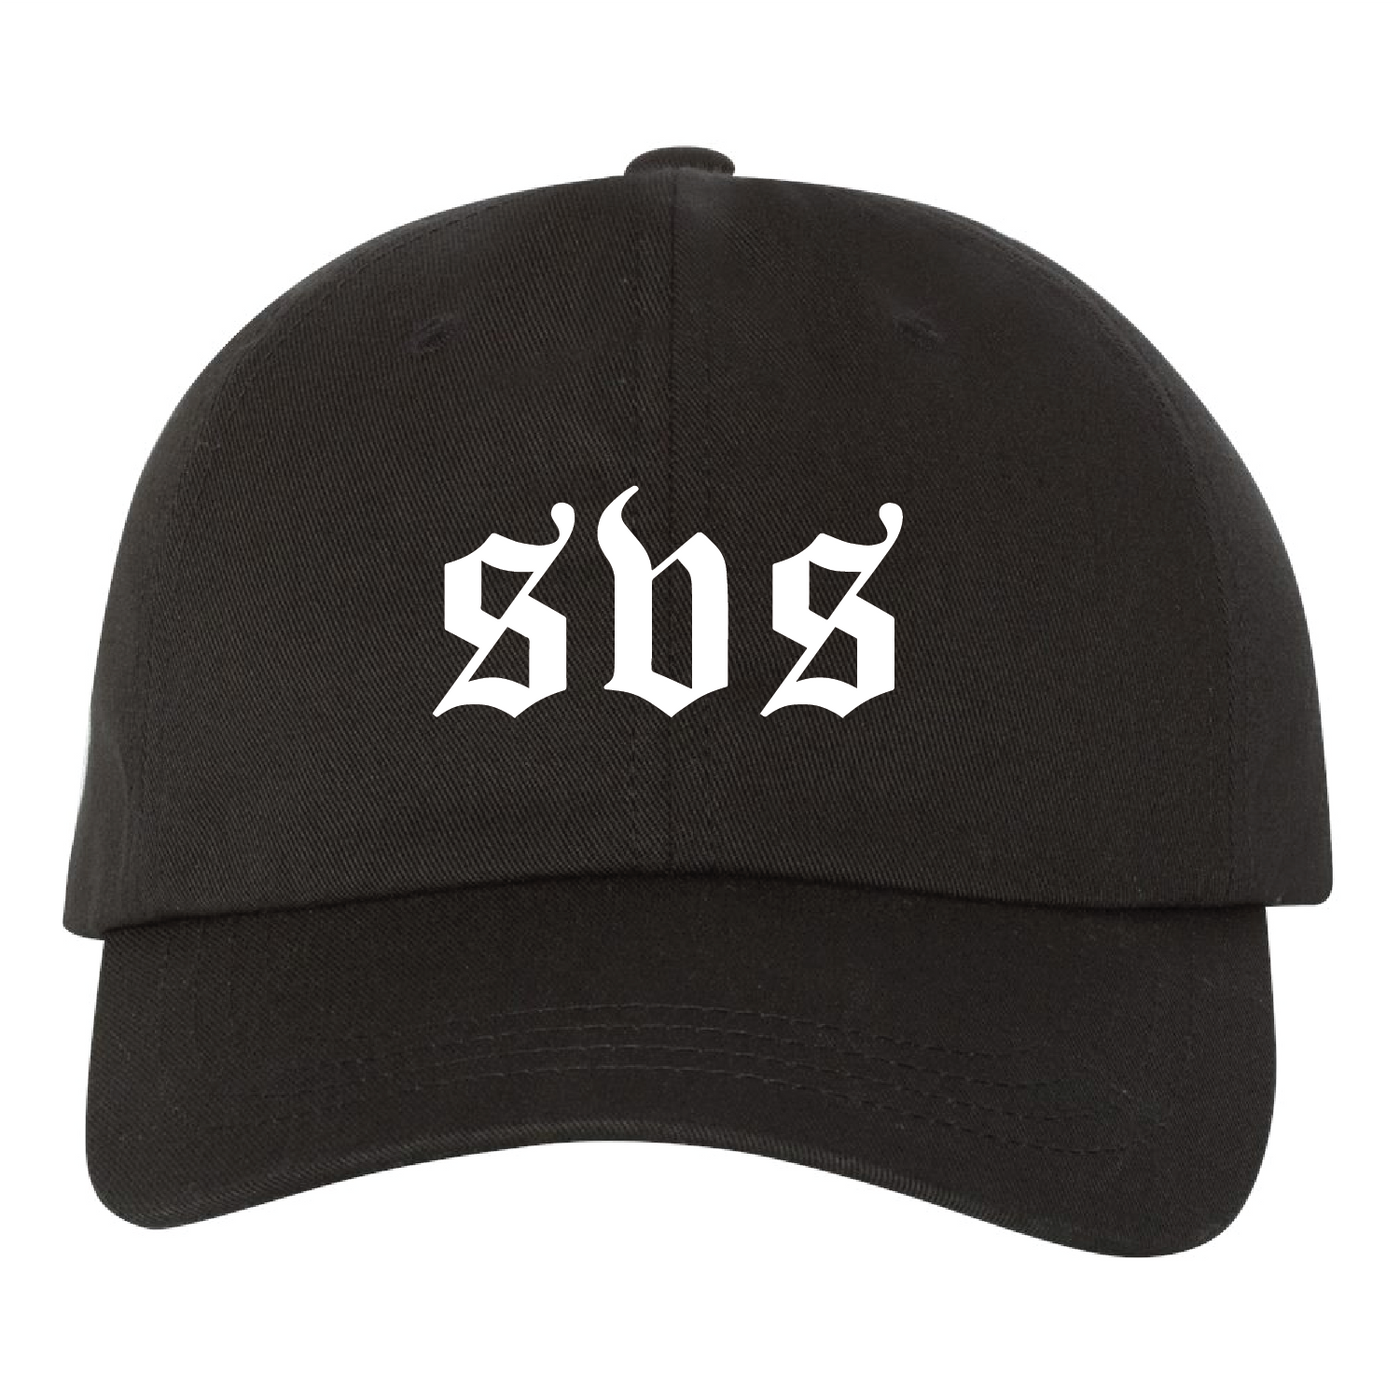 Silence Violence Silence Embroidered Hats